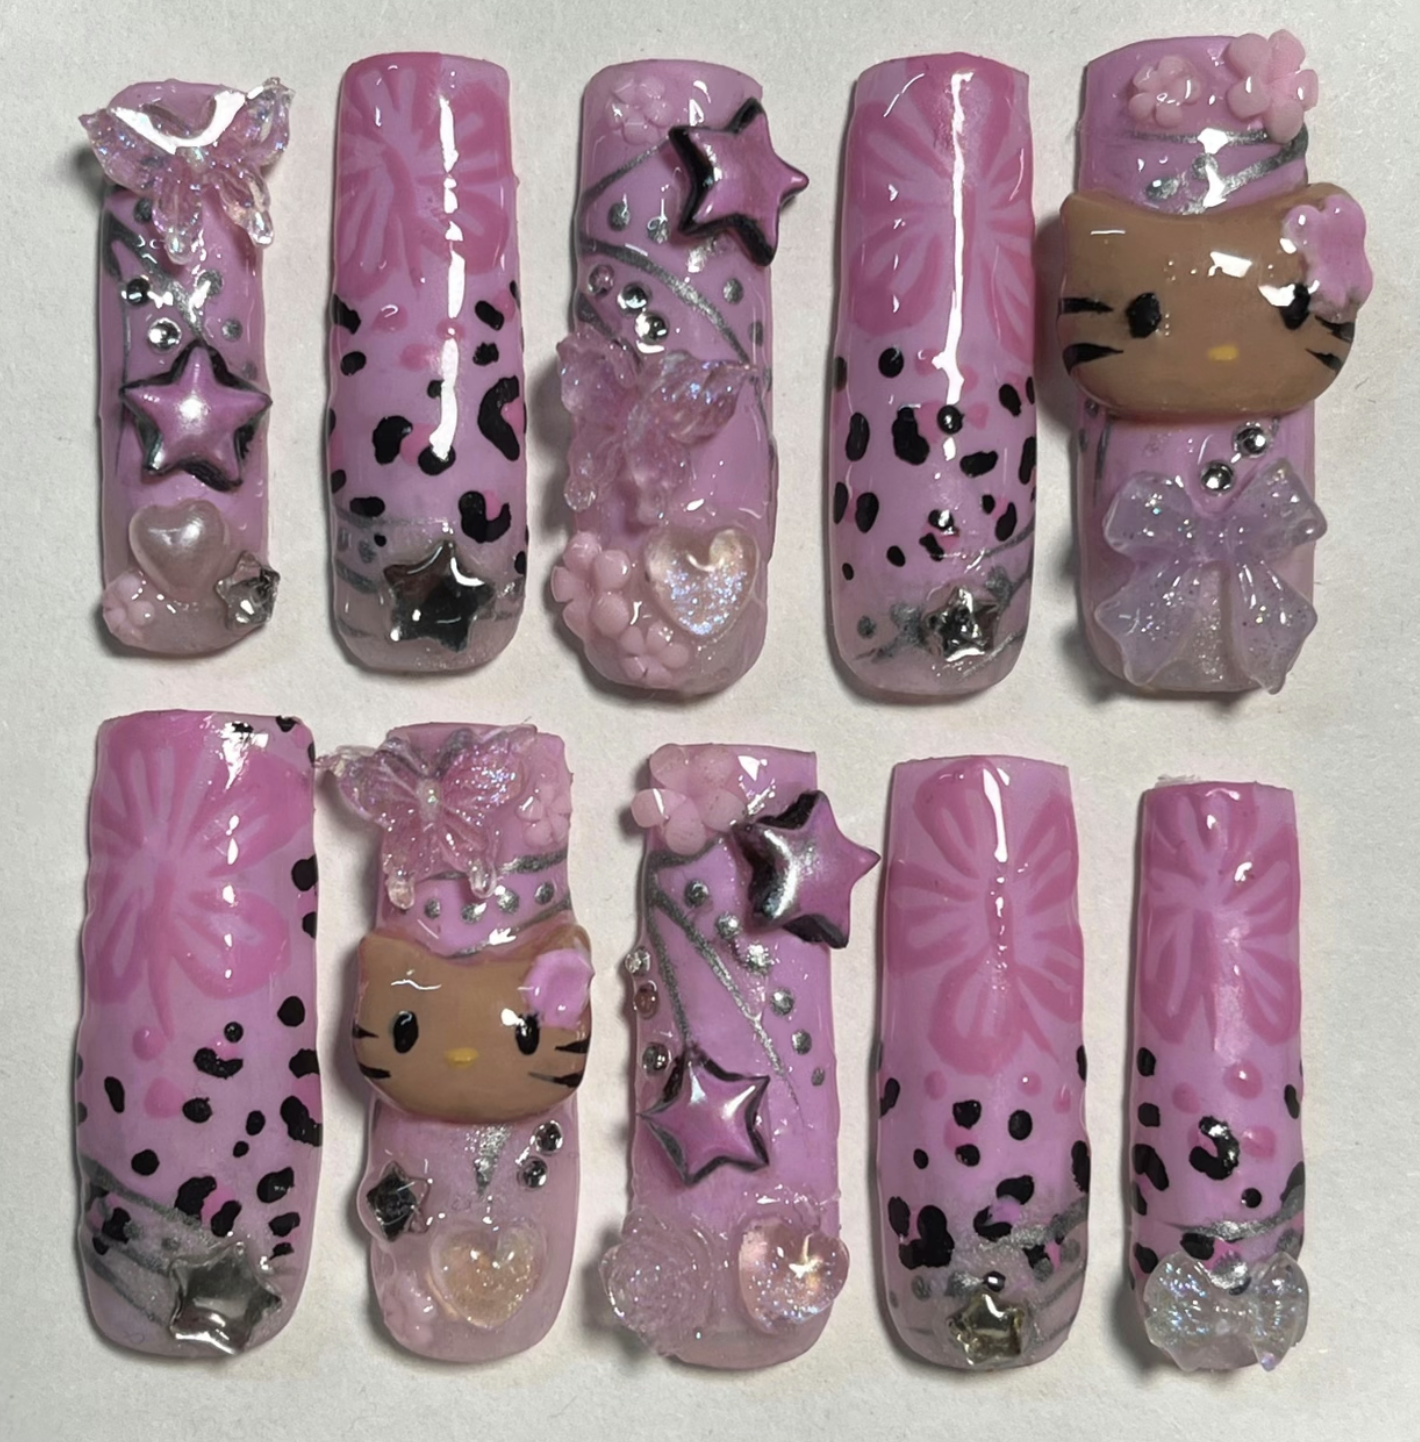 One of Kylies nail sets, with a pink Hello Kitty theme